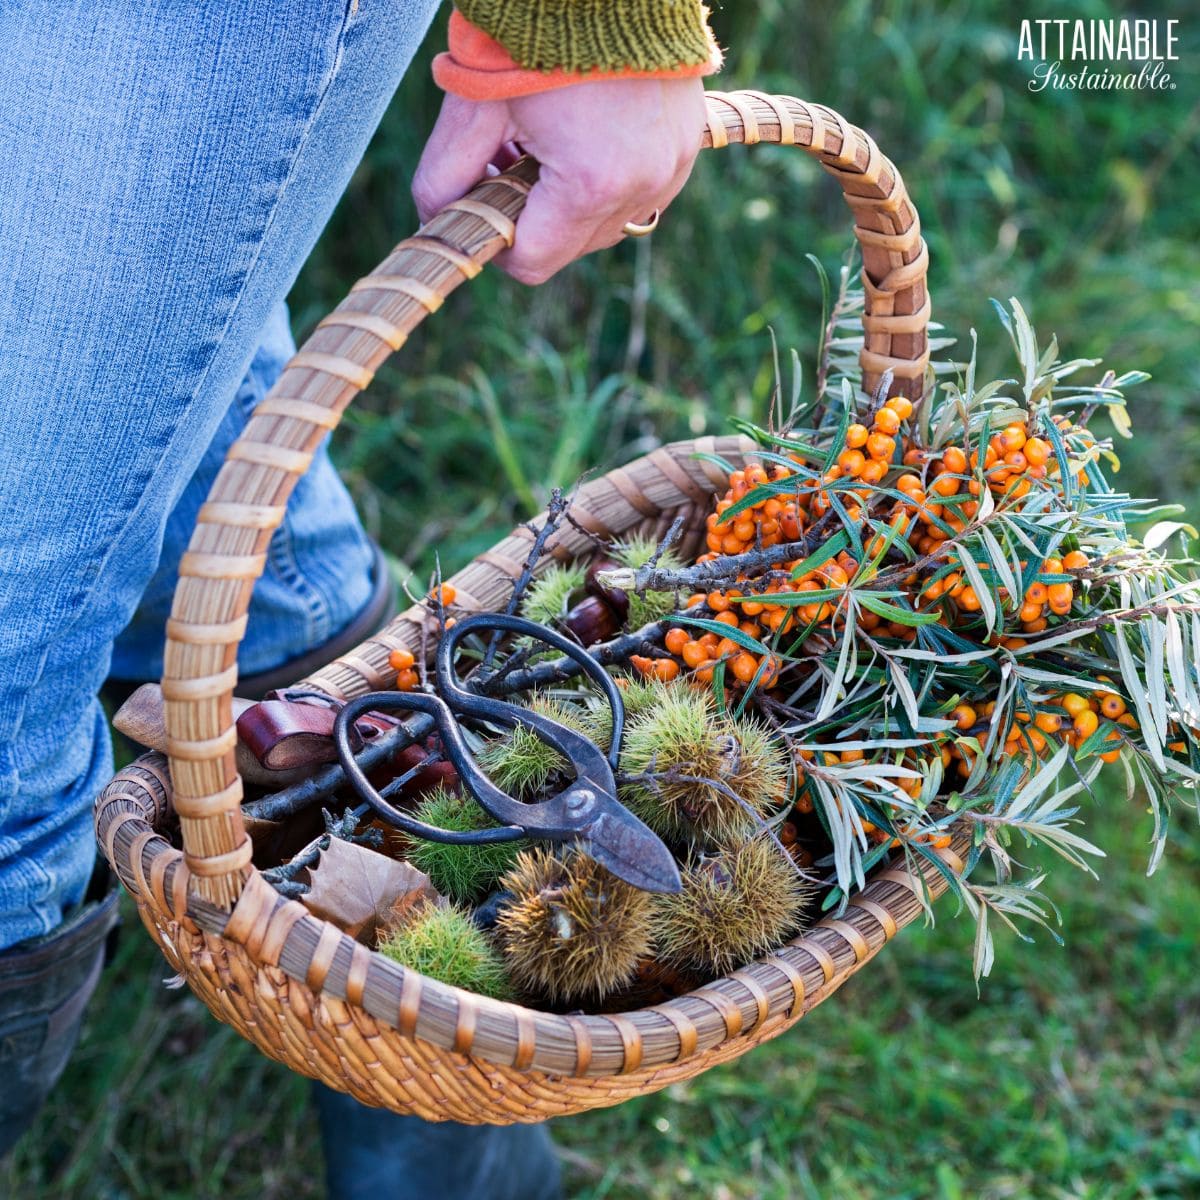 hand holding a basket full of foraged food.